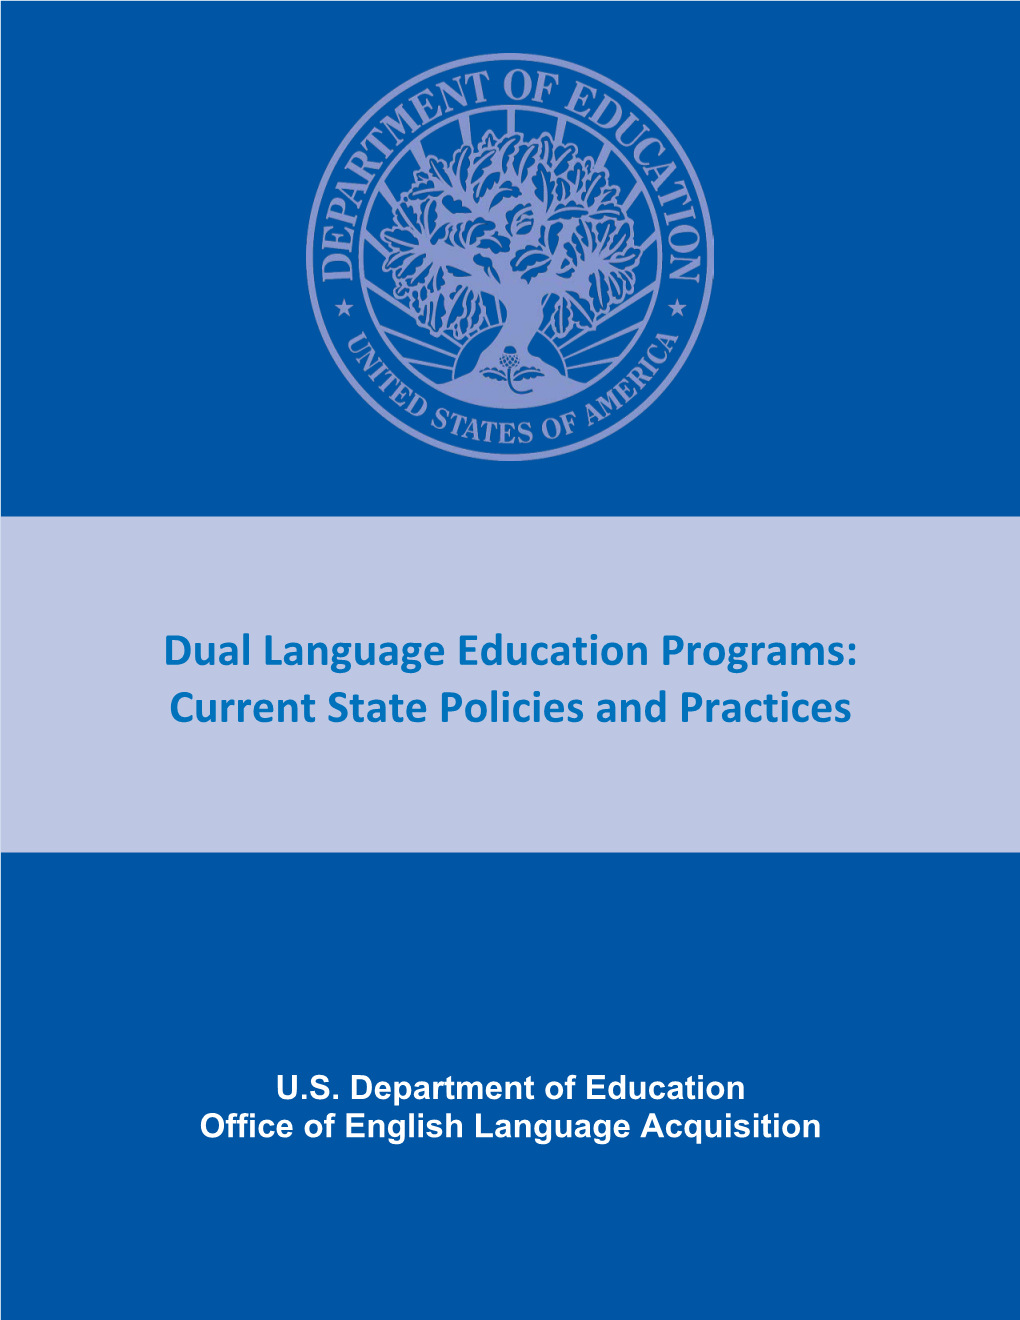 Dual Language Education Programs: Current State Policies and Practices